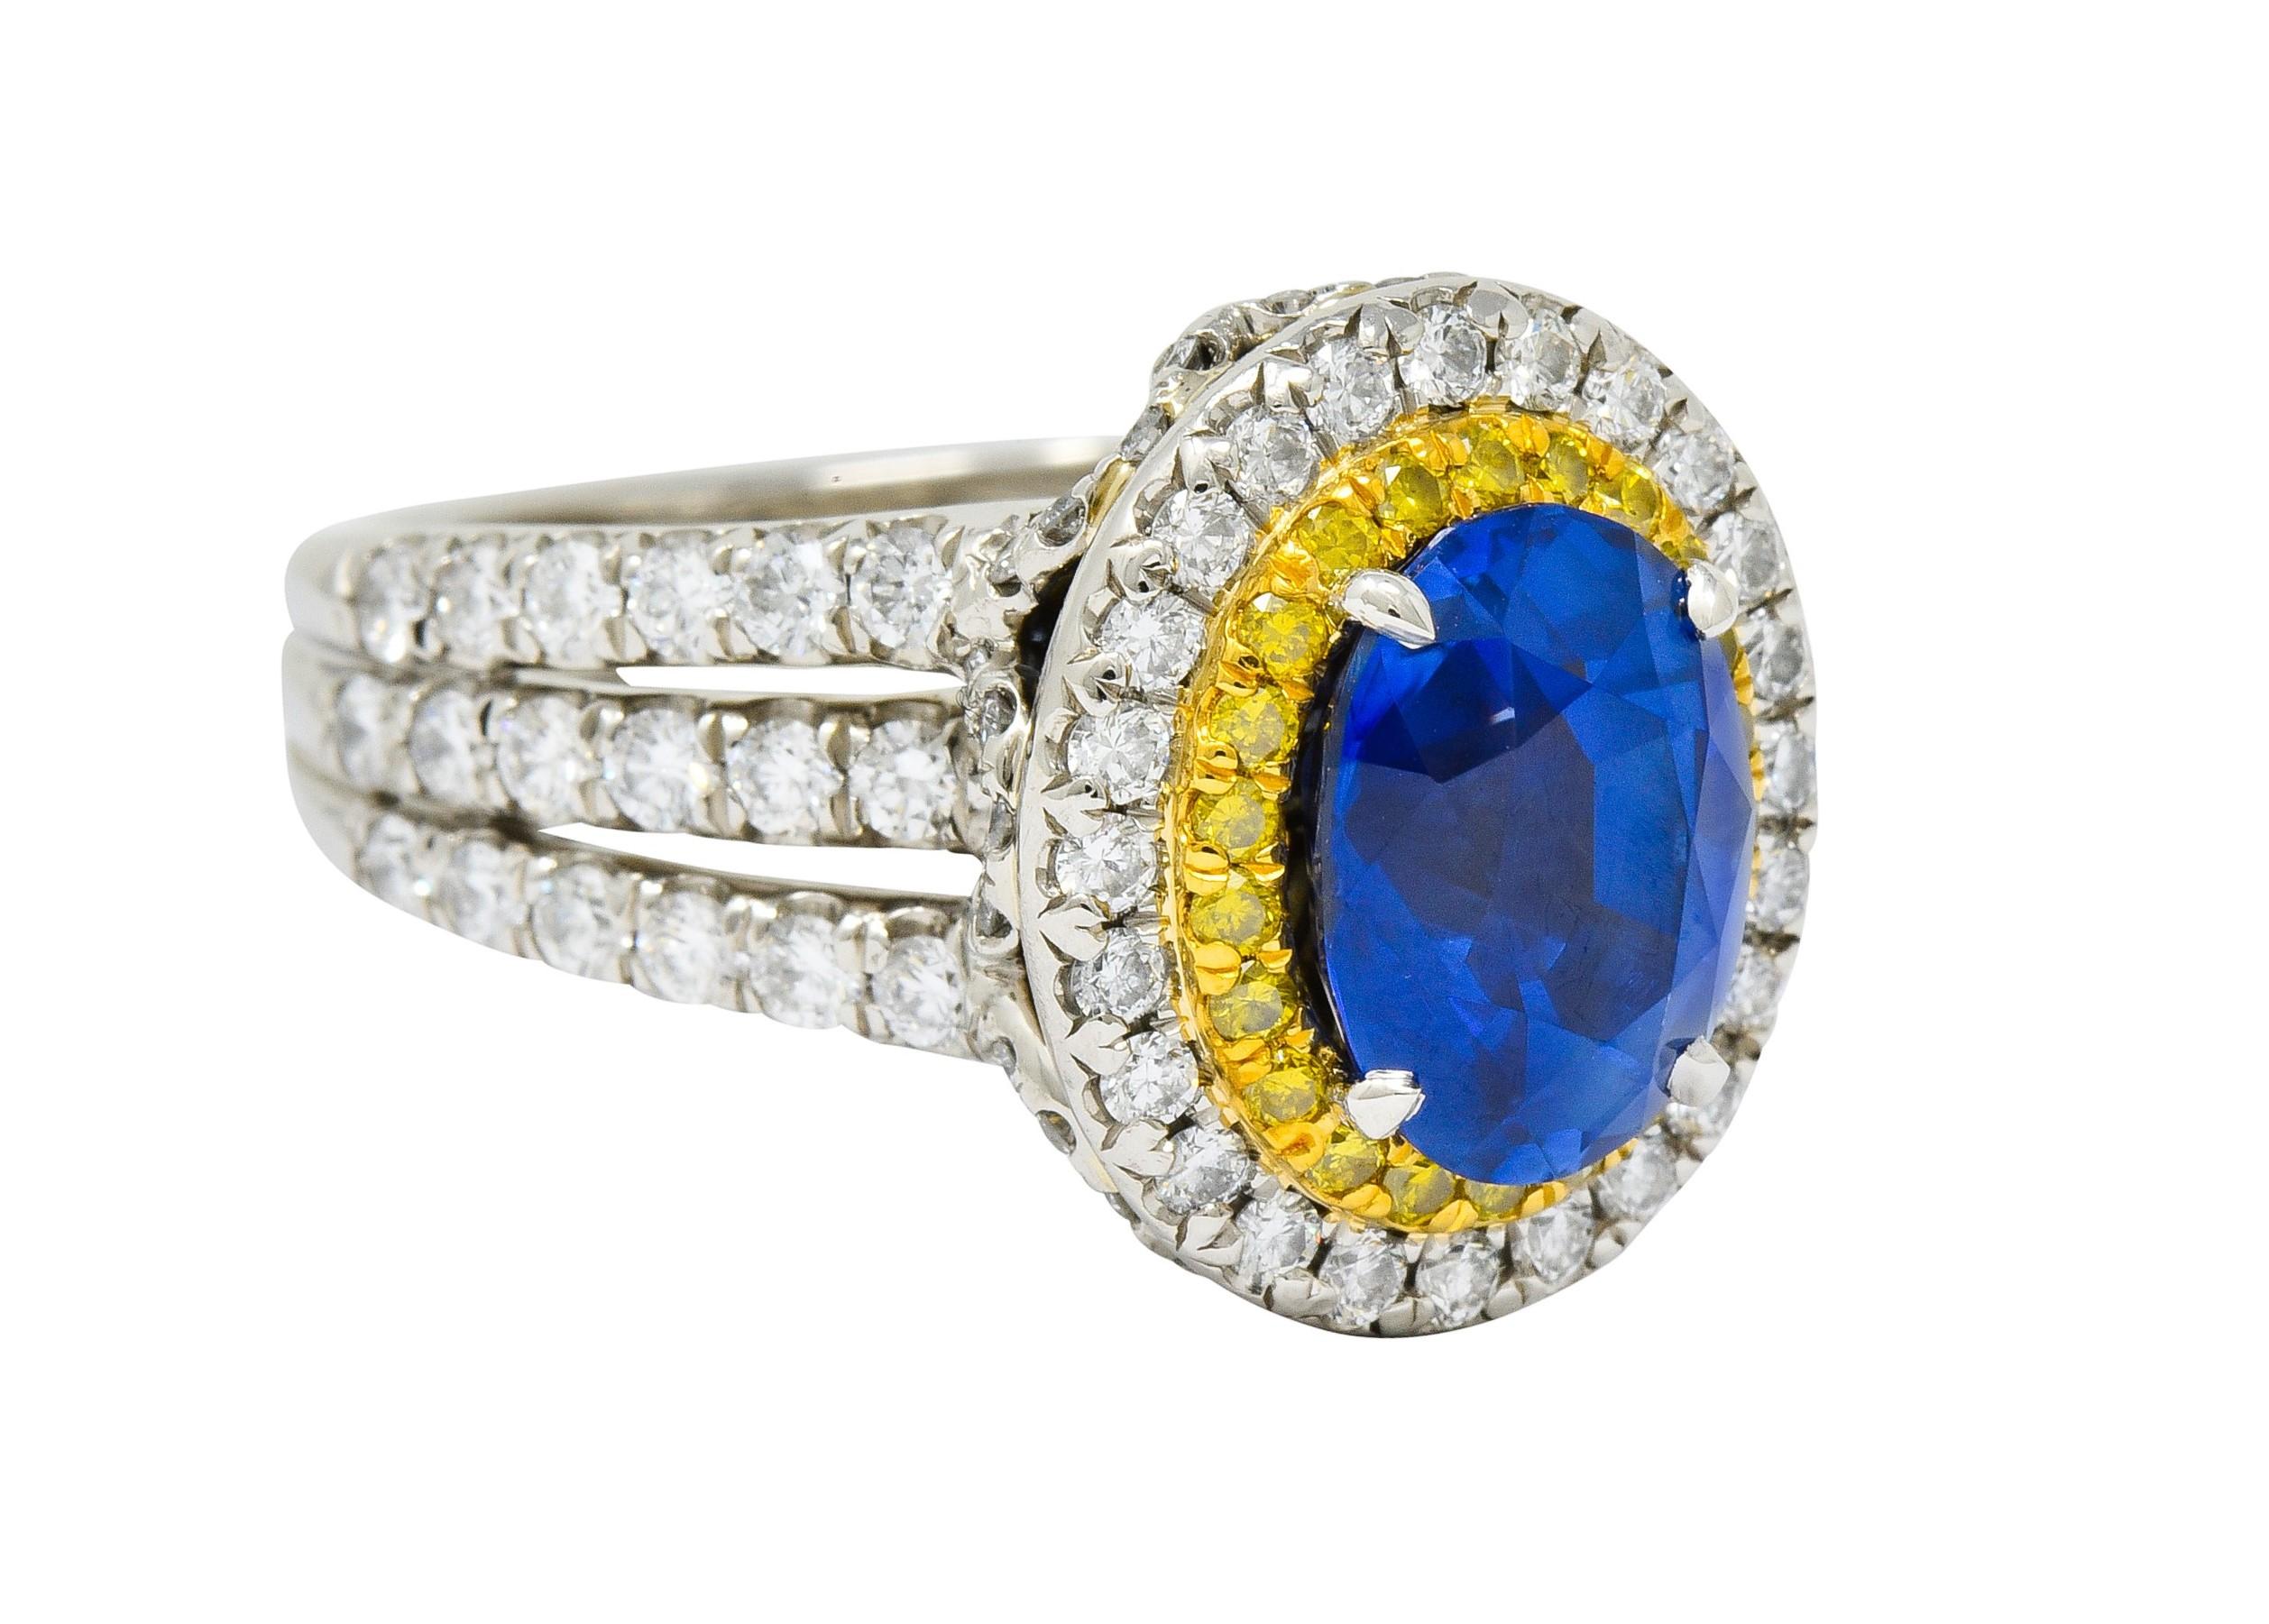 Centering an oval cut Ceylon sapphire weighing approximately 3.87 carats; bright blue in color with no indications of heat

Surrounded by a double halo of yellow and white diamonds, set in yellow gold and platinum

With a deeply scalloped gallery